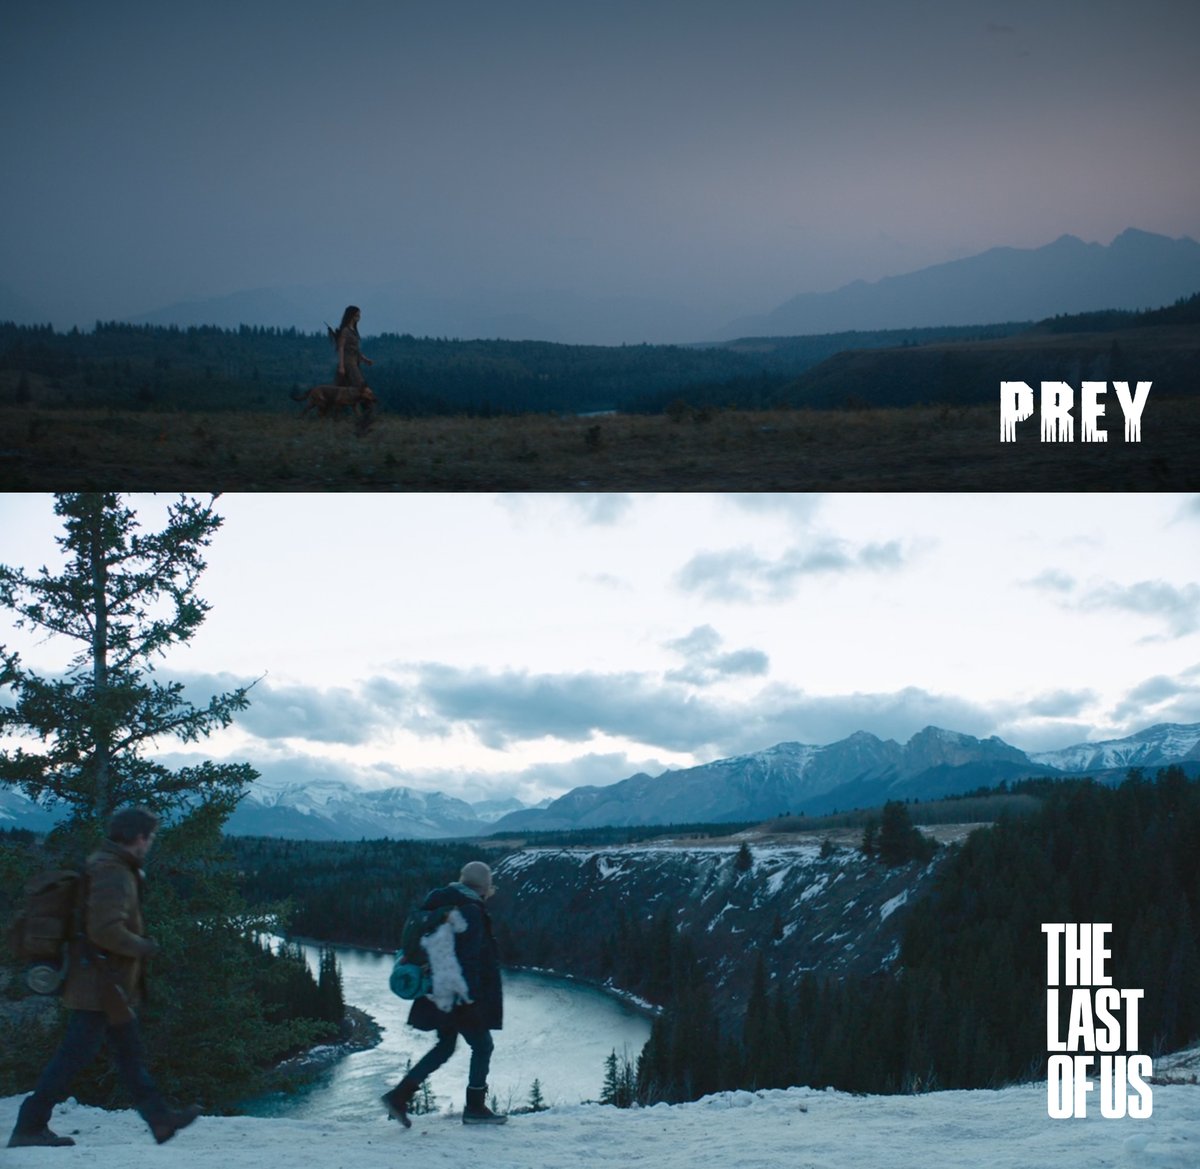 I guess I've watched #PreyMovie way too many times to notice shit like this.
#TheLastOfUs